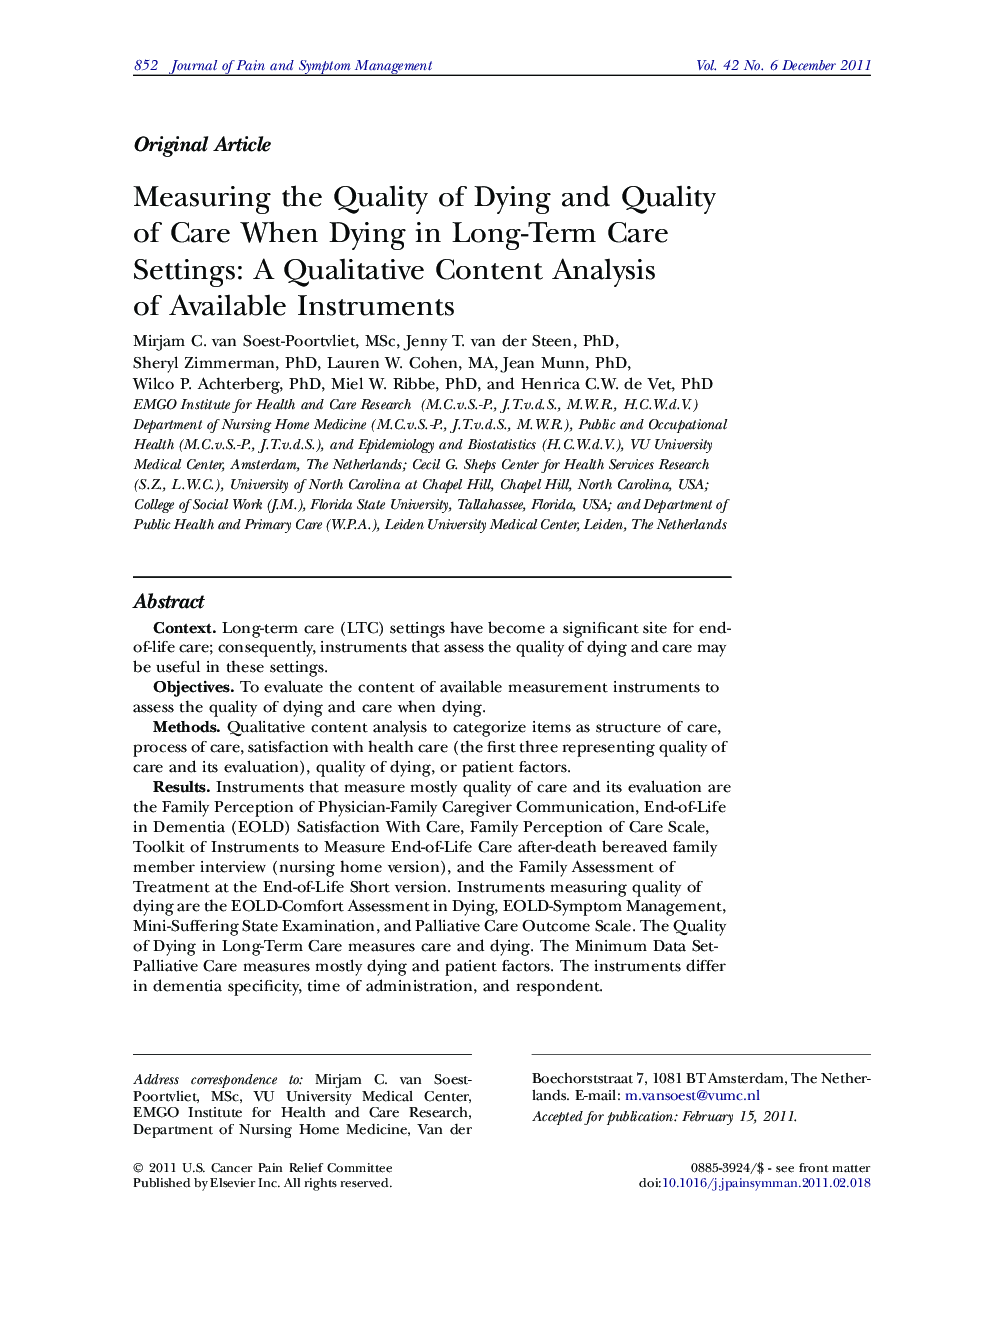 Measuring the Quality of Dying and Quality of Care When Dying in Long-Term Care Settings: A Qualitative Content Analysis of Available Instruments